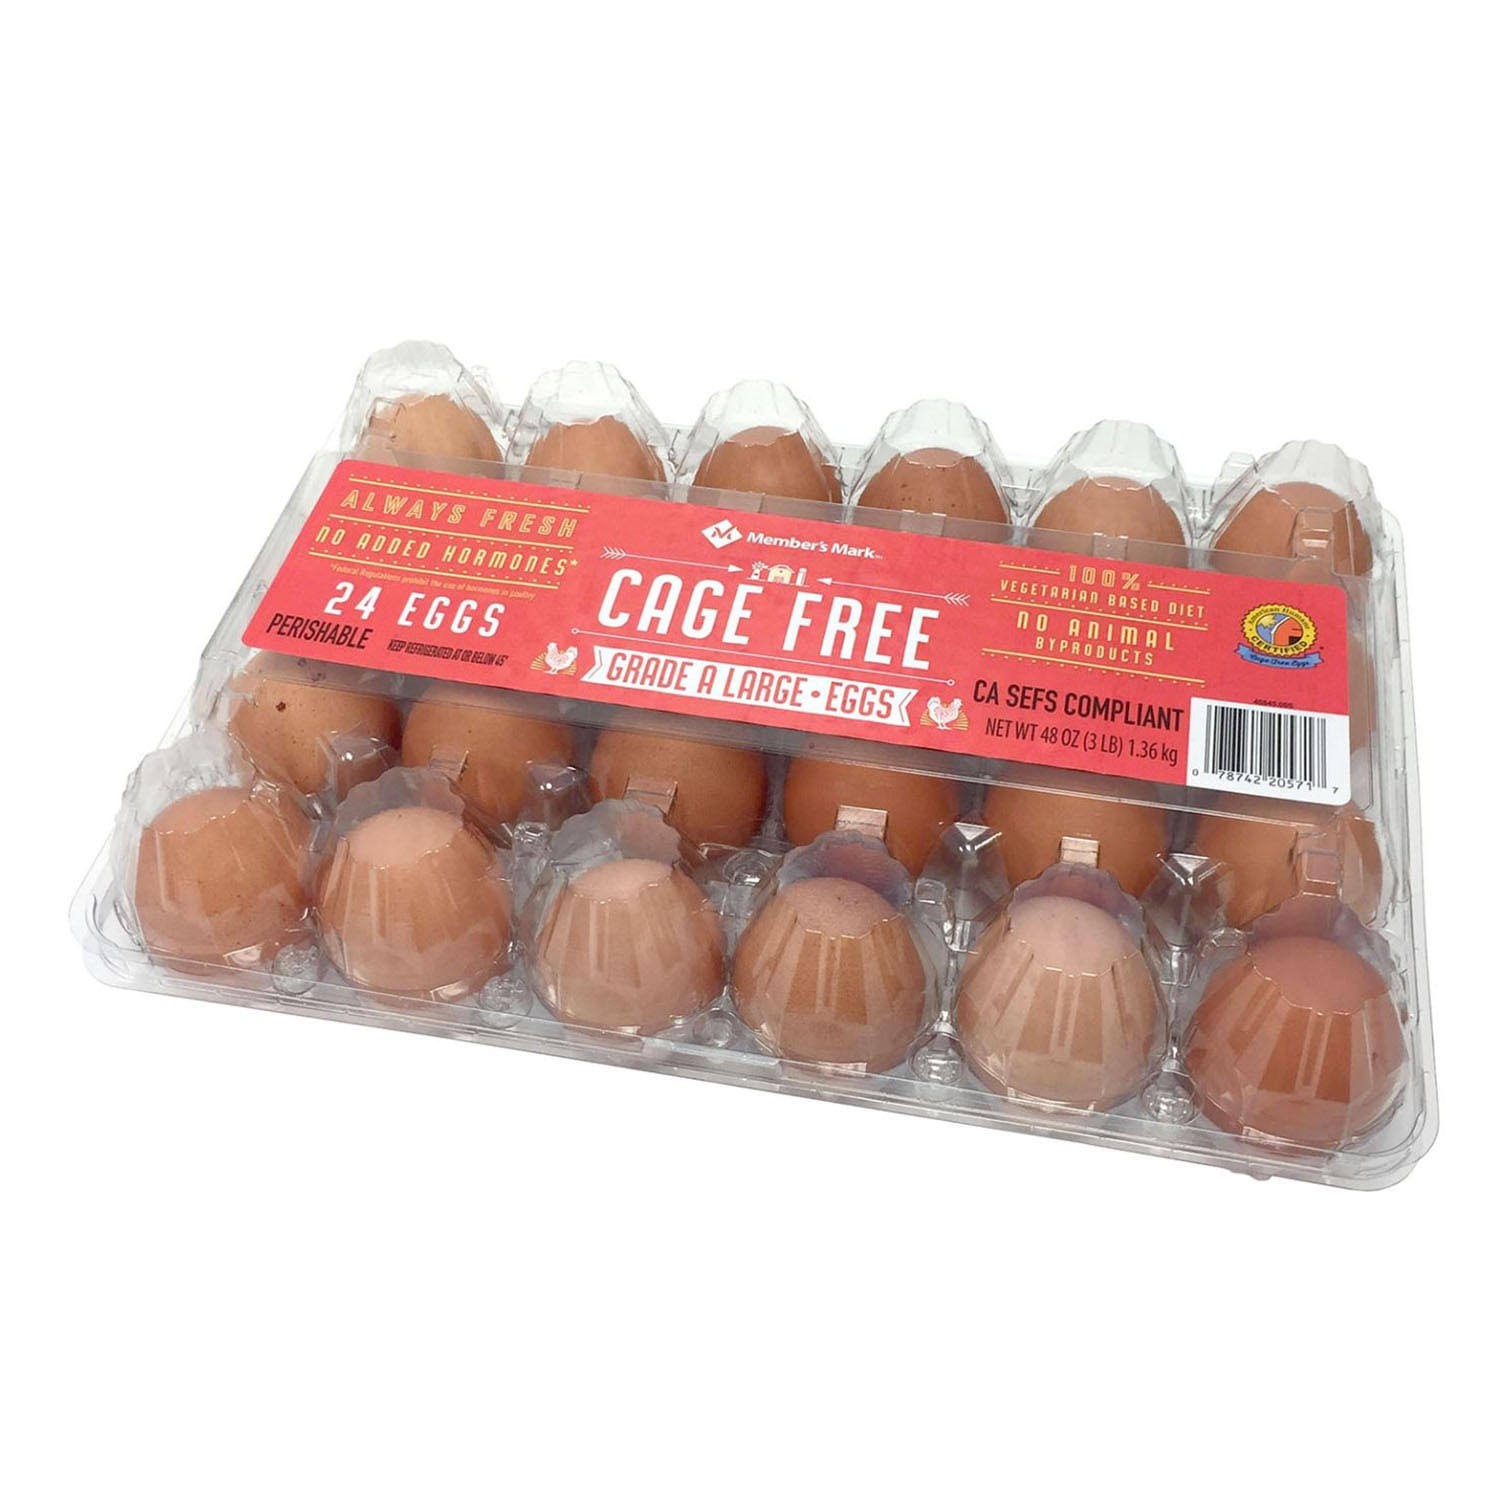 Member's Mark Cage Free Eggs - 24 ct